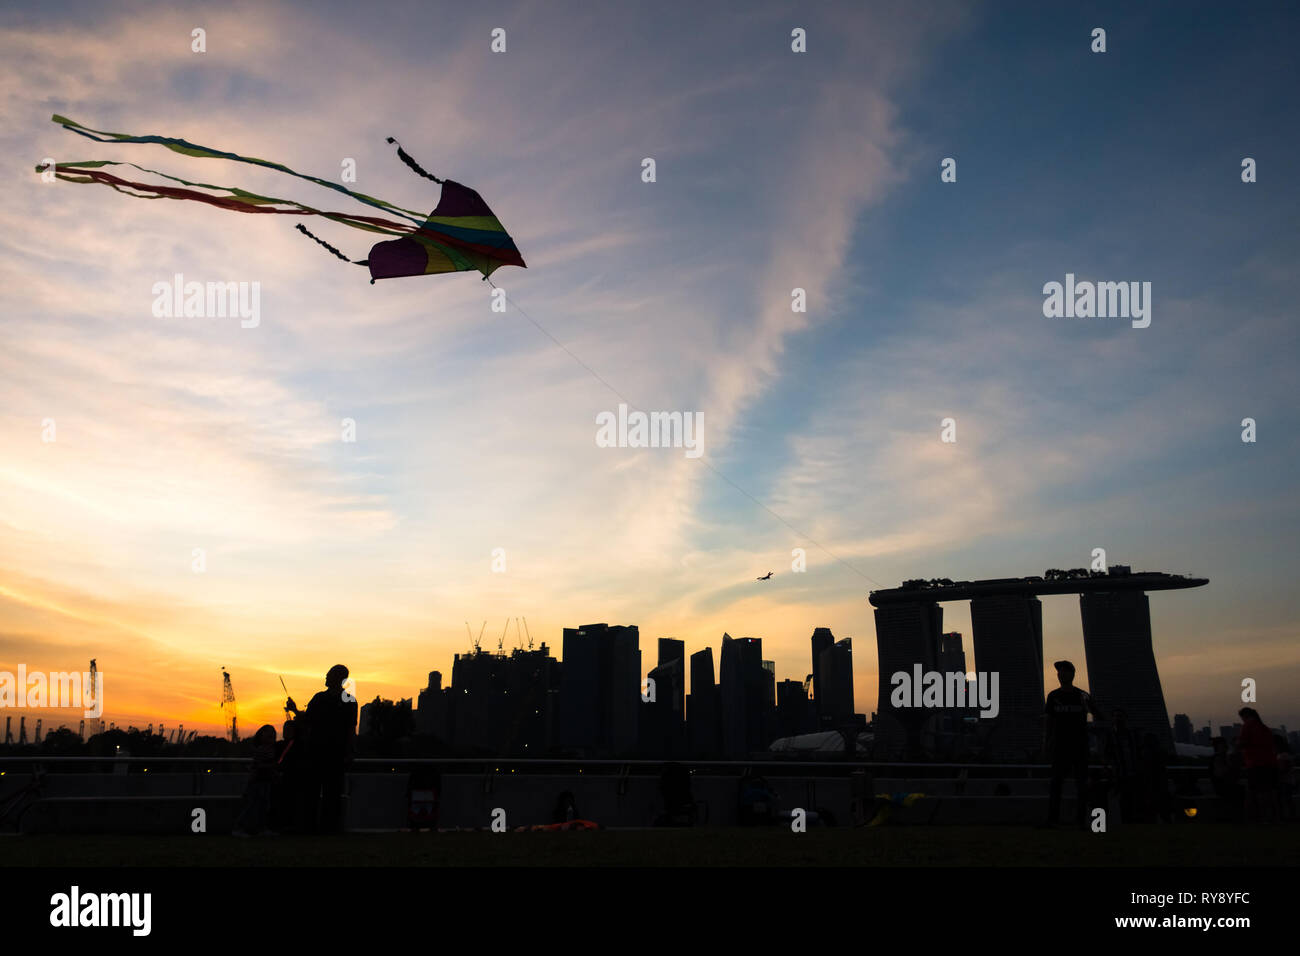 Kite flying silhouette and Marina Bay Sands Sunset View - Marina Barrage -Singapore Stock Photo